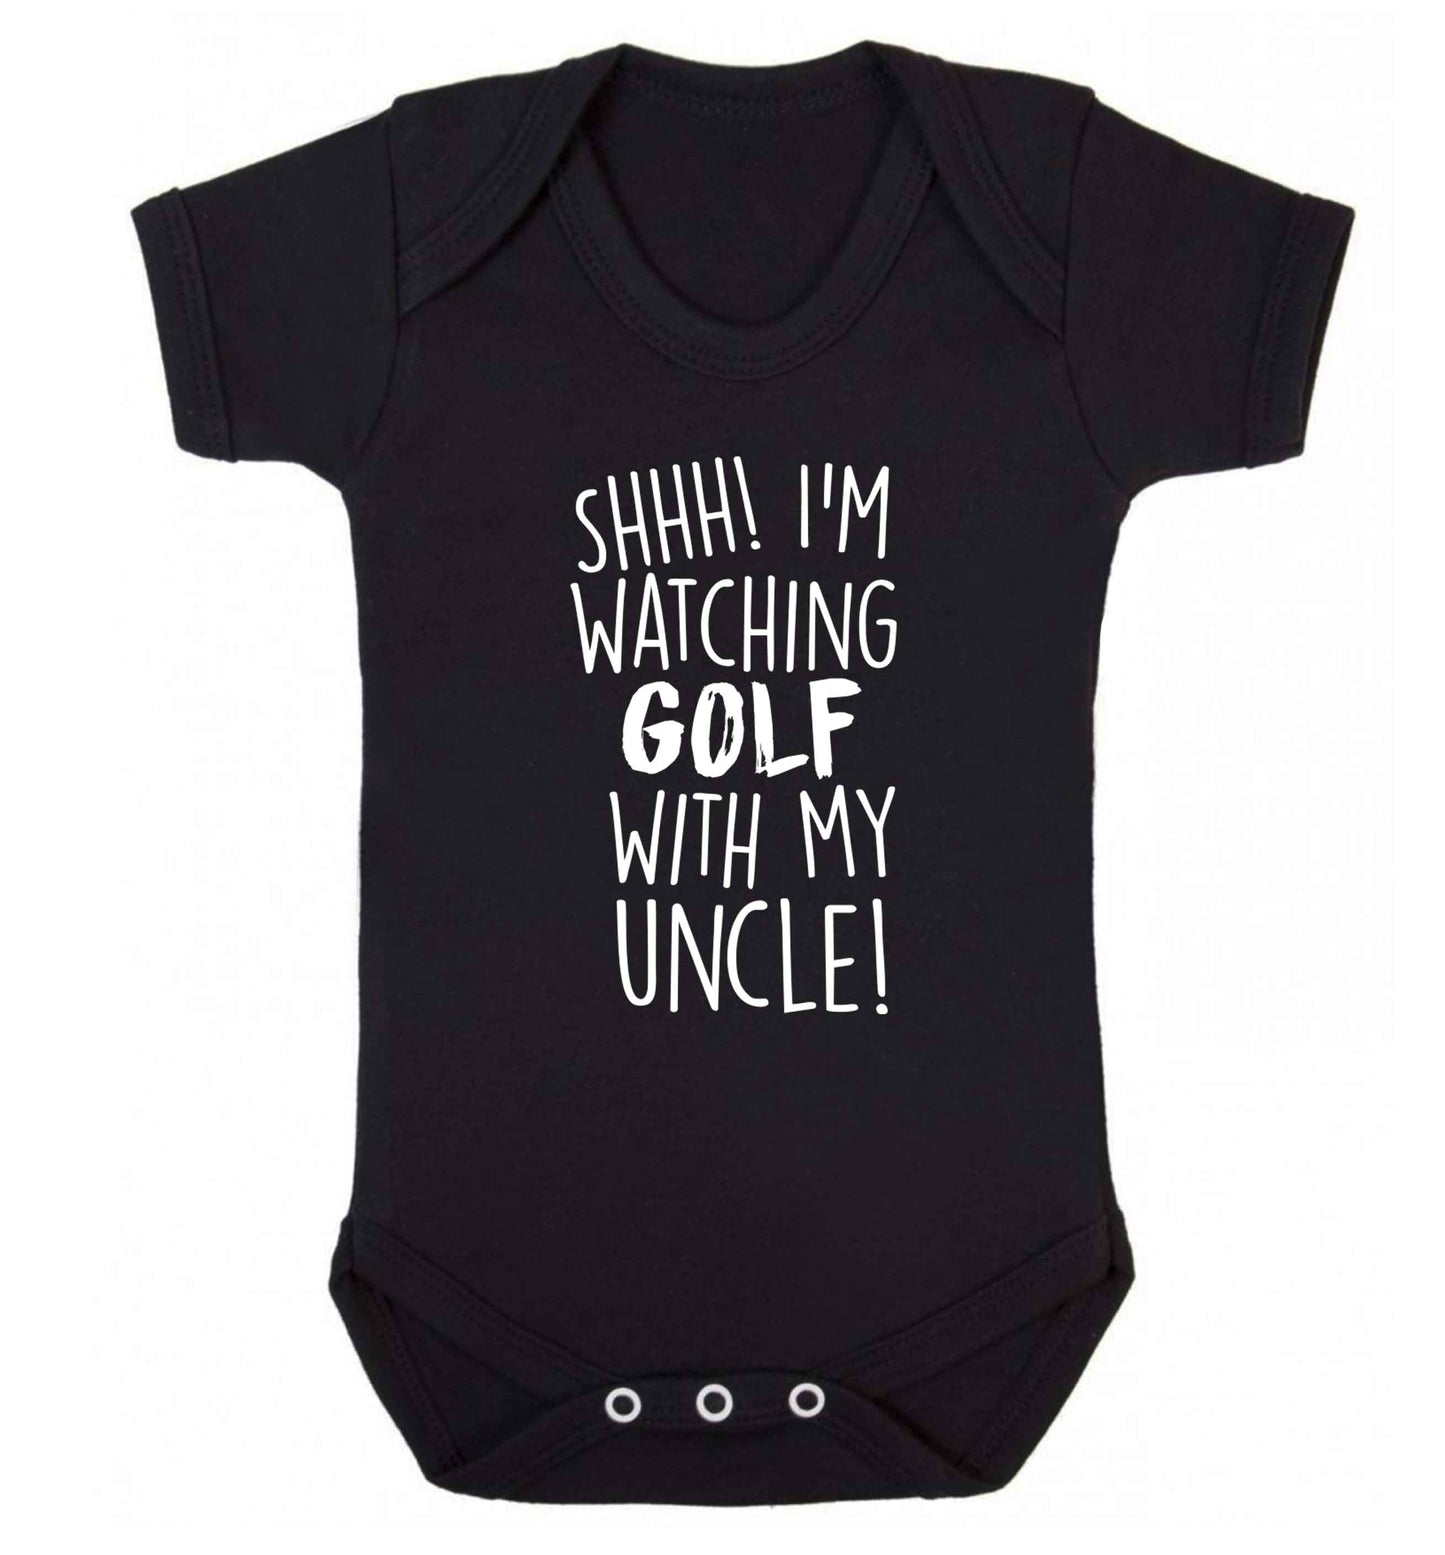 Shh I'm watching golf with my uncle Baby Vest black 18-24 months